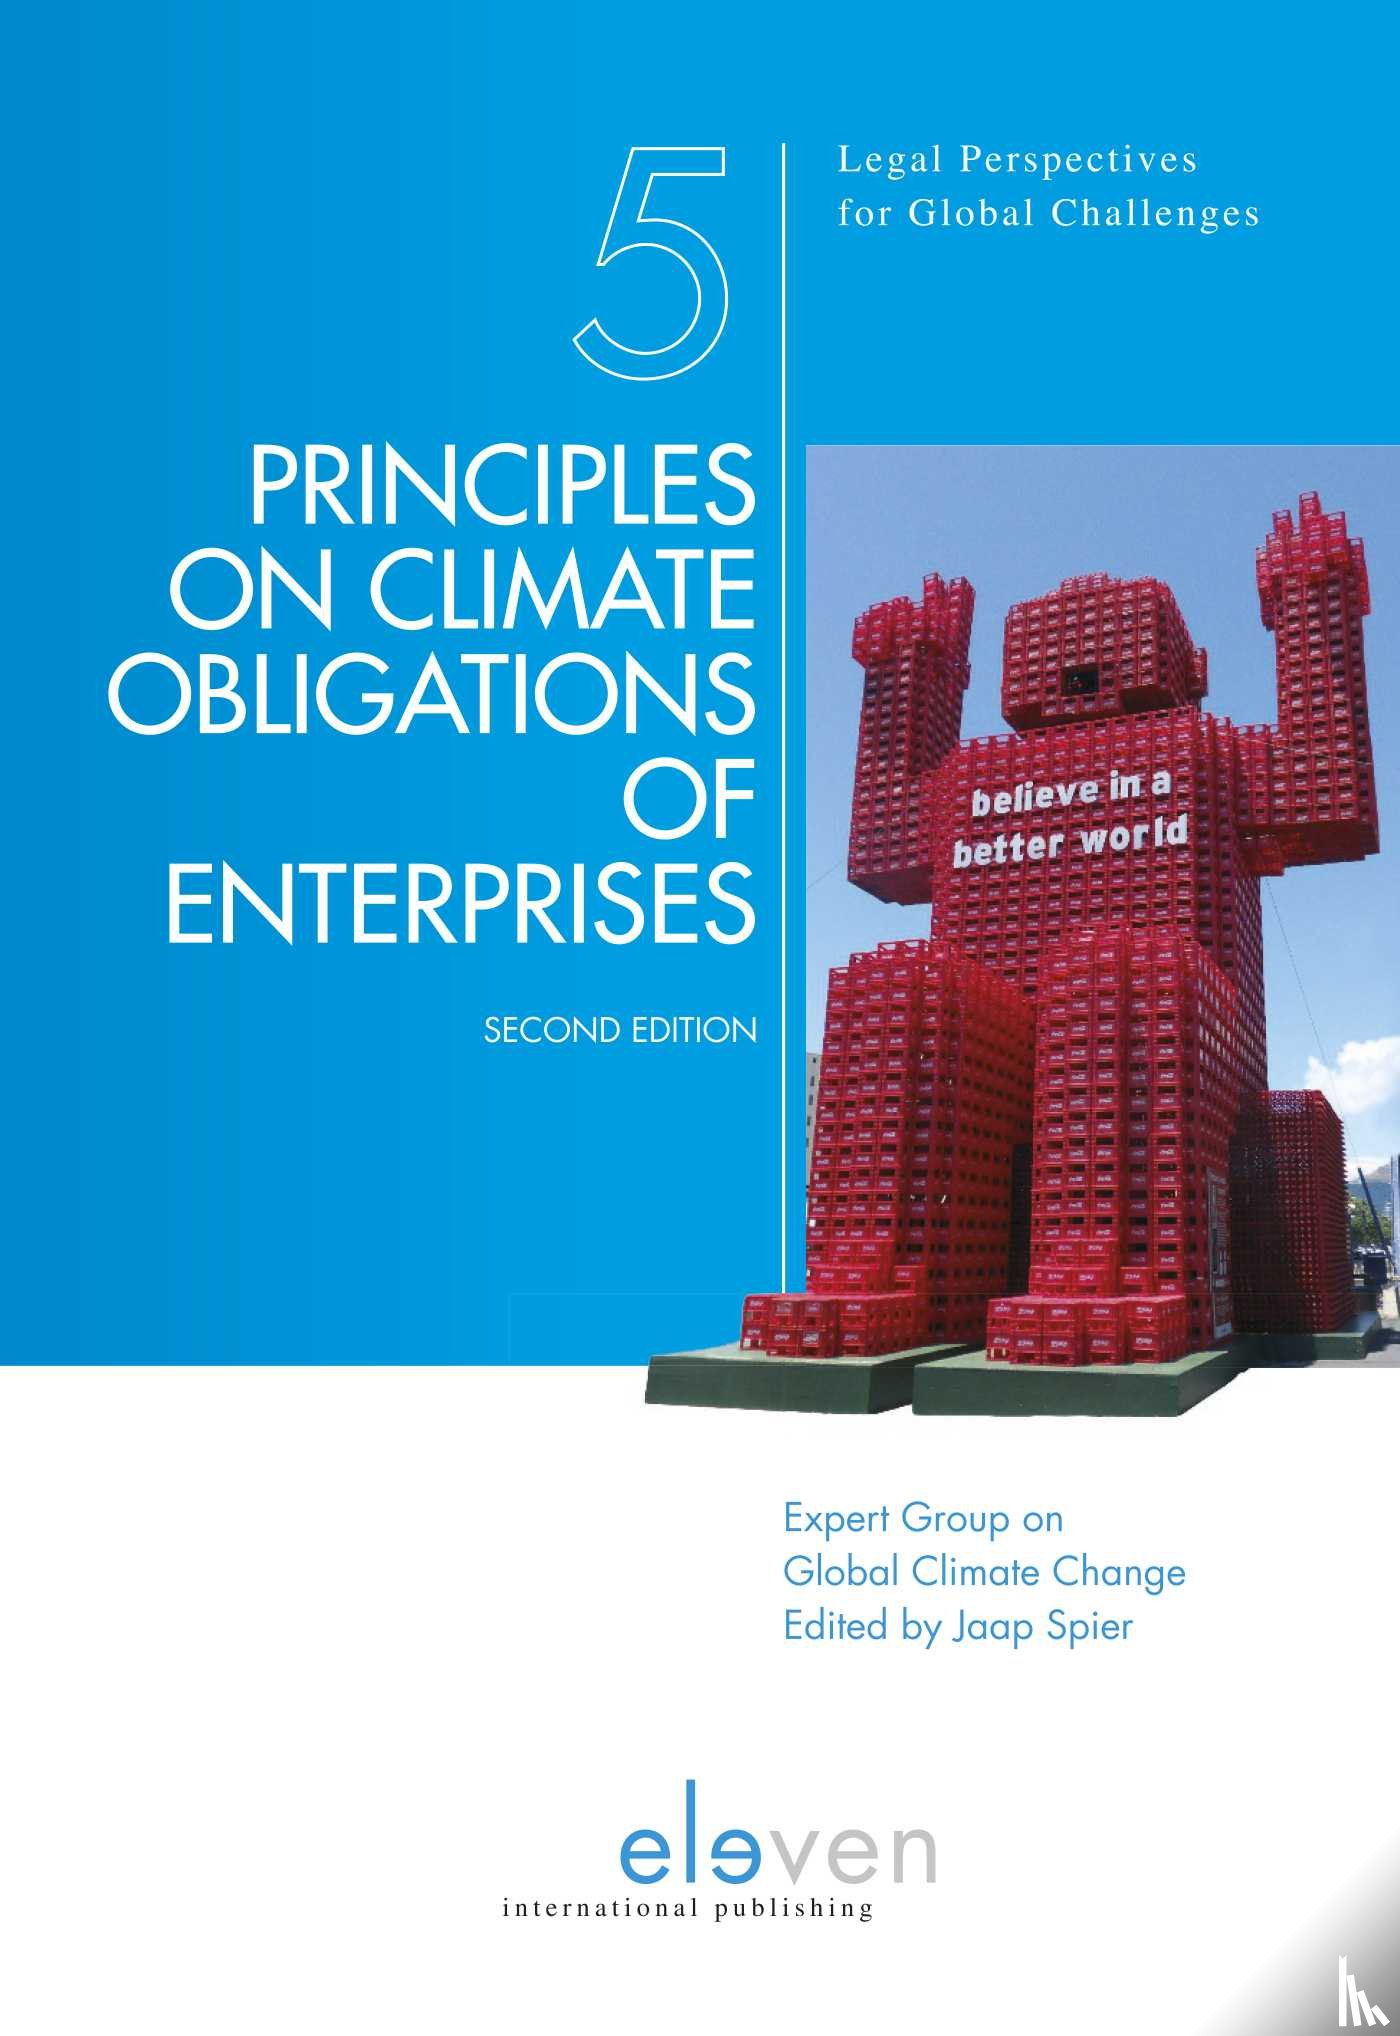 Expert Group on Climate Obligations of Enterprises - Principles on Climate Obligations of Enterprises